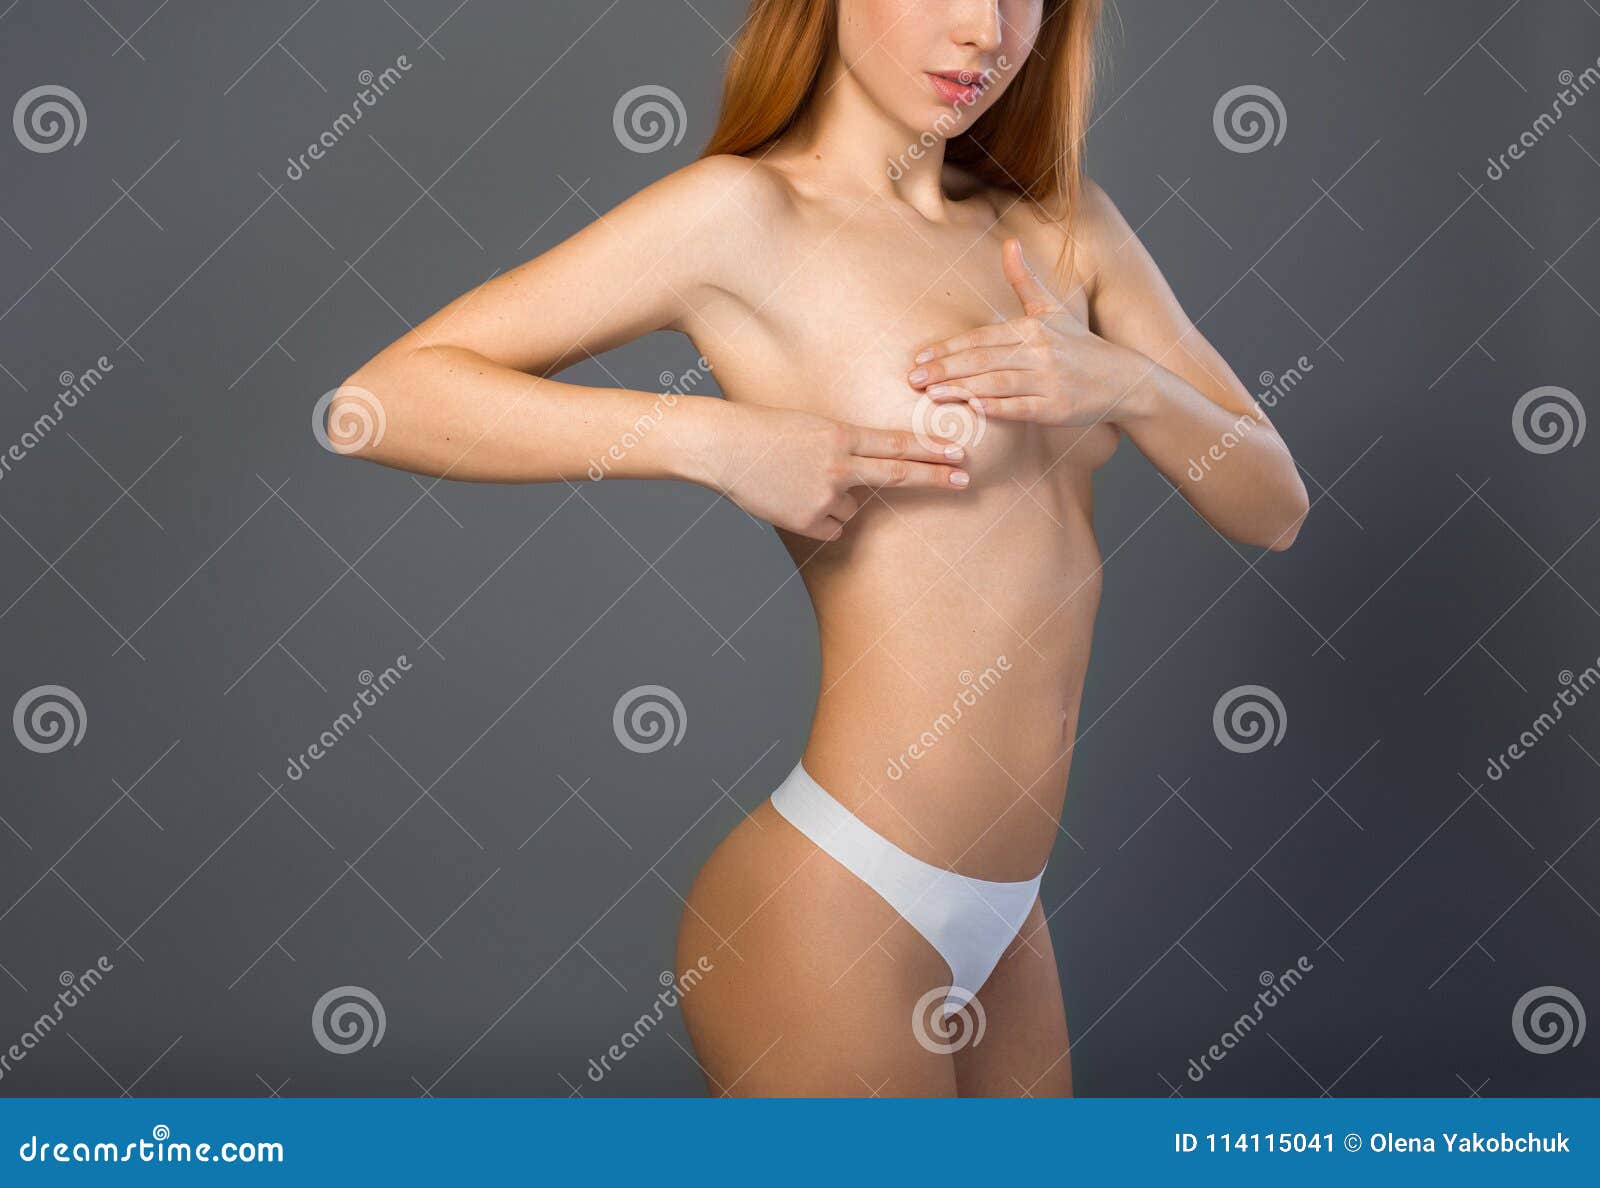 Photos of naked woman touching their breast - Real Naked Girls